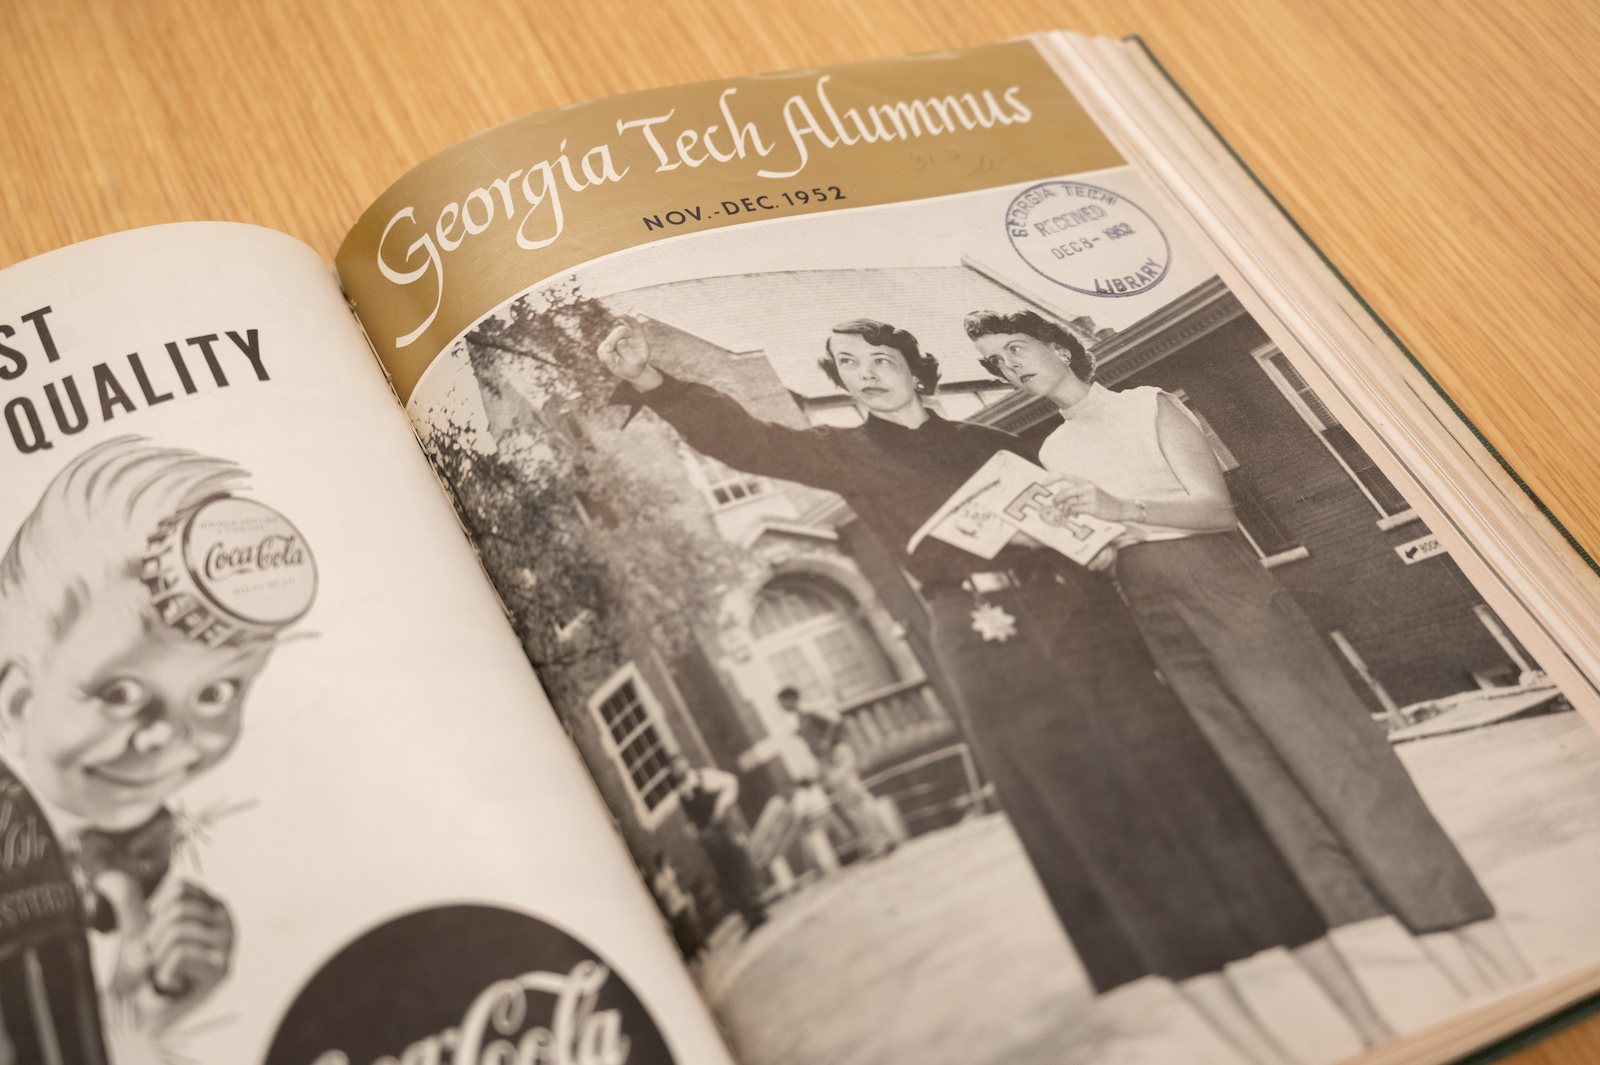 Archival materials, including stories on Tech's first women students, are available for viewing in the Archives Reading Room on the first floor of Crosland Tower. (Photo by Allison Carter)